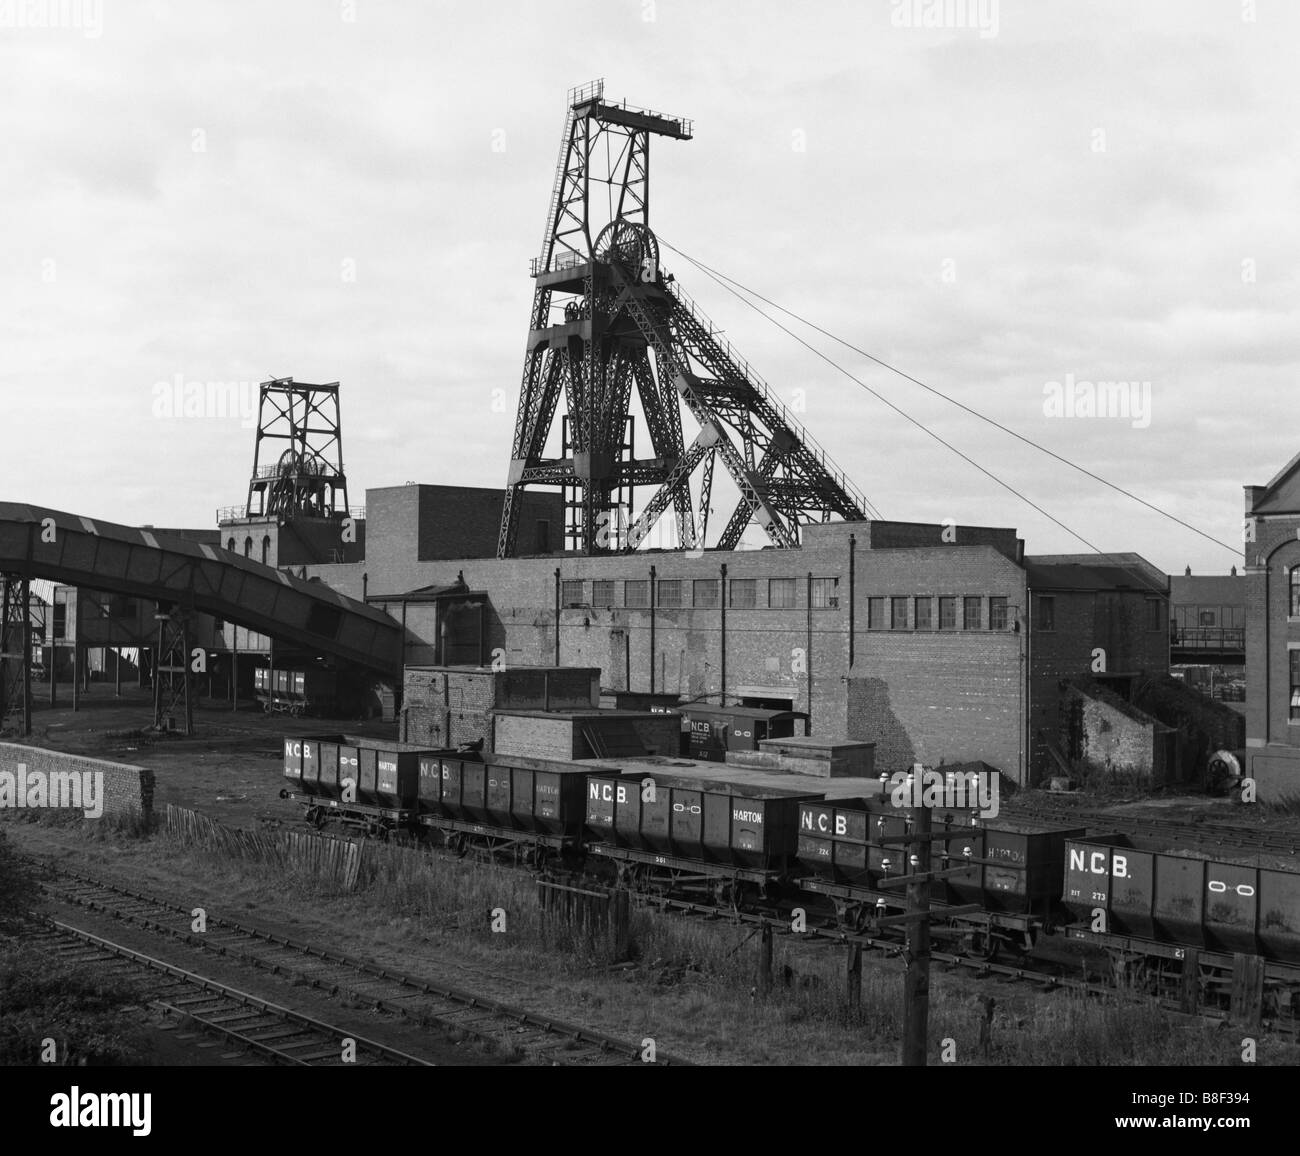 The pithead of Boldon Colliery coal mine with NCB coal trucks in the foreground, north east England, UK Stock Photo